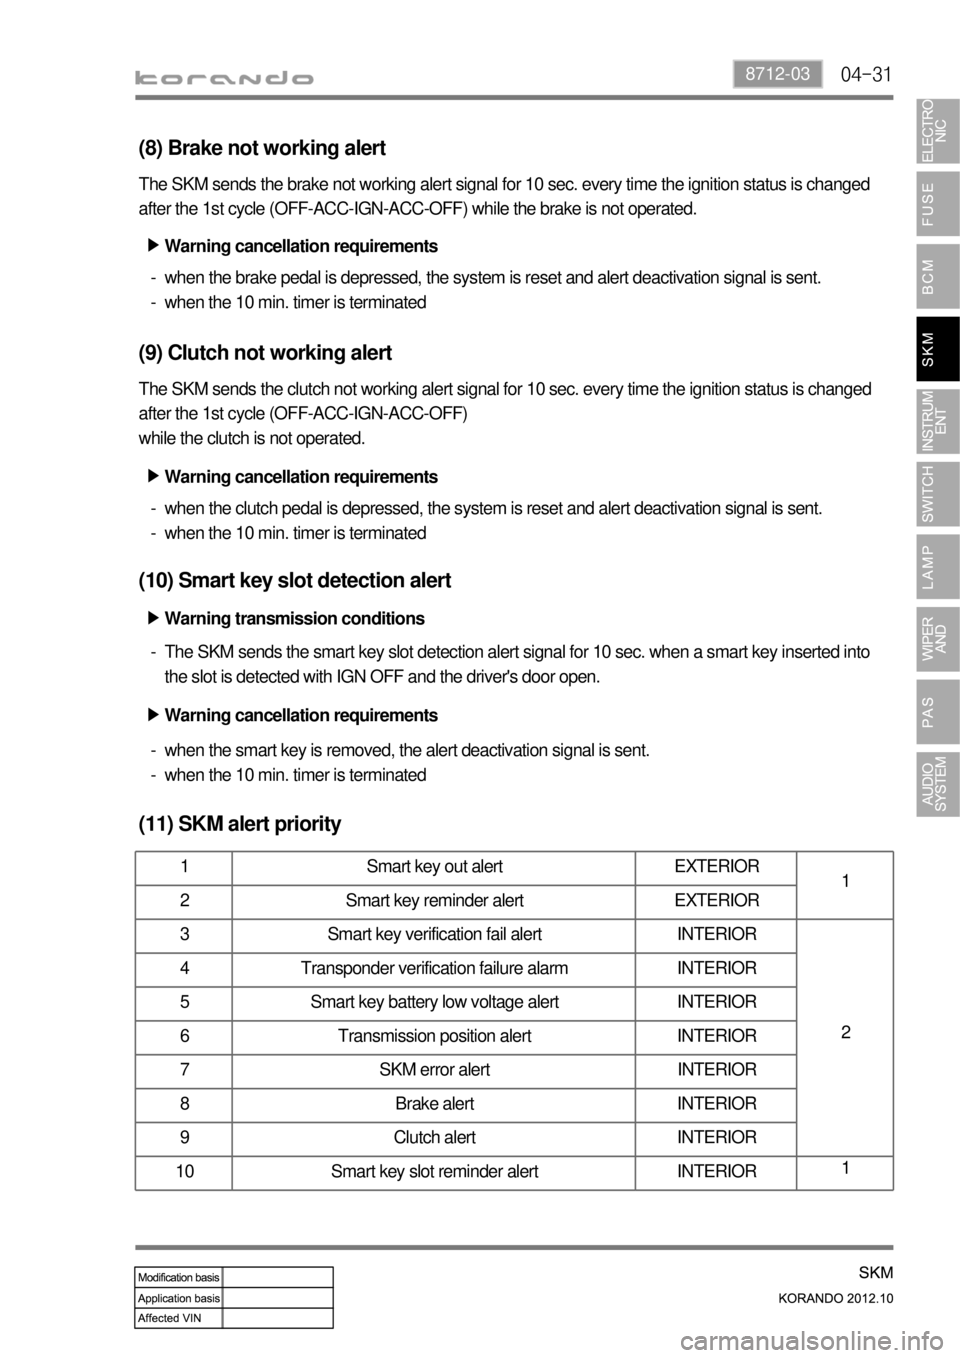 SSANGYONG KORANDO 2012  Service Manual 04-318712-03
(8) Brake not working alert
The SKM sends the brake not working alert signal for 10 sec. every time the ignition status is changed 
after the 1st cycle (OFF-ACC-IGN-ACC-OFF) while the bra